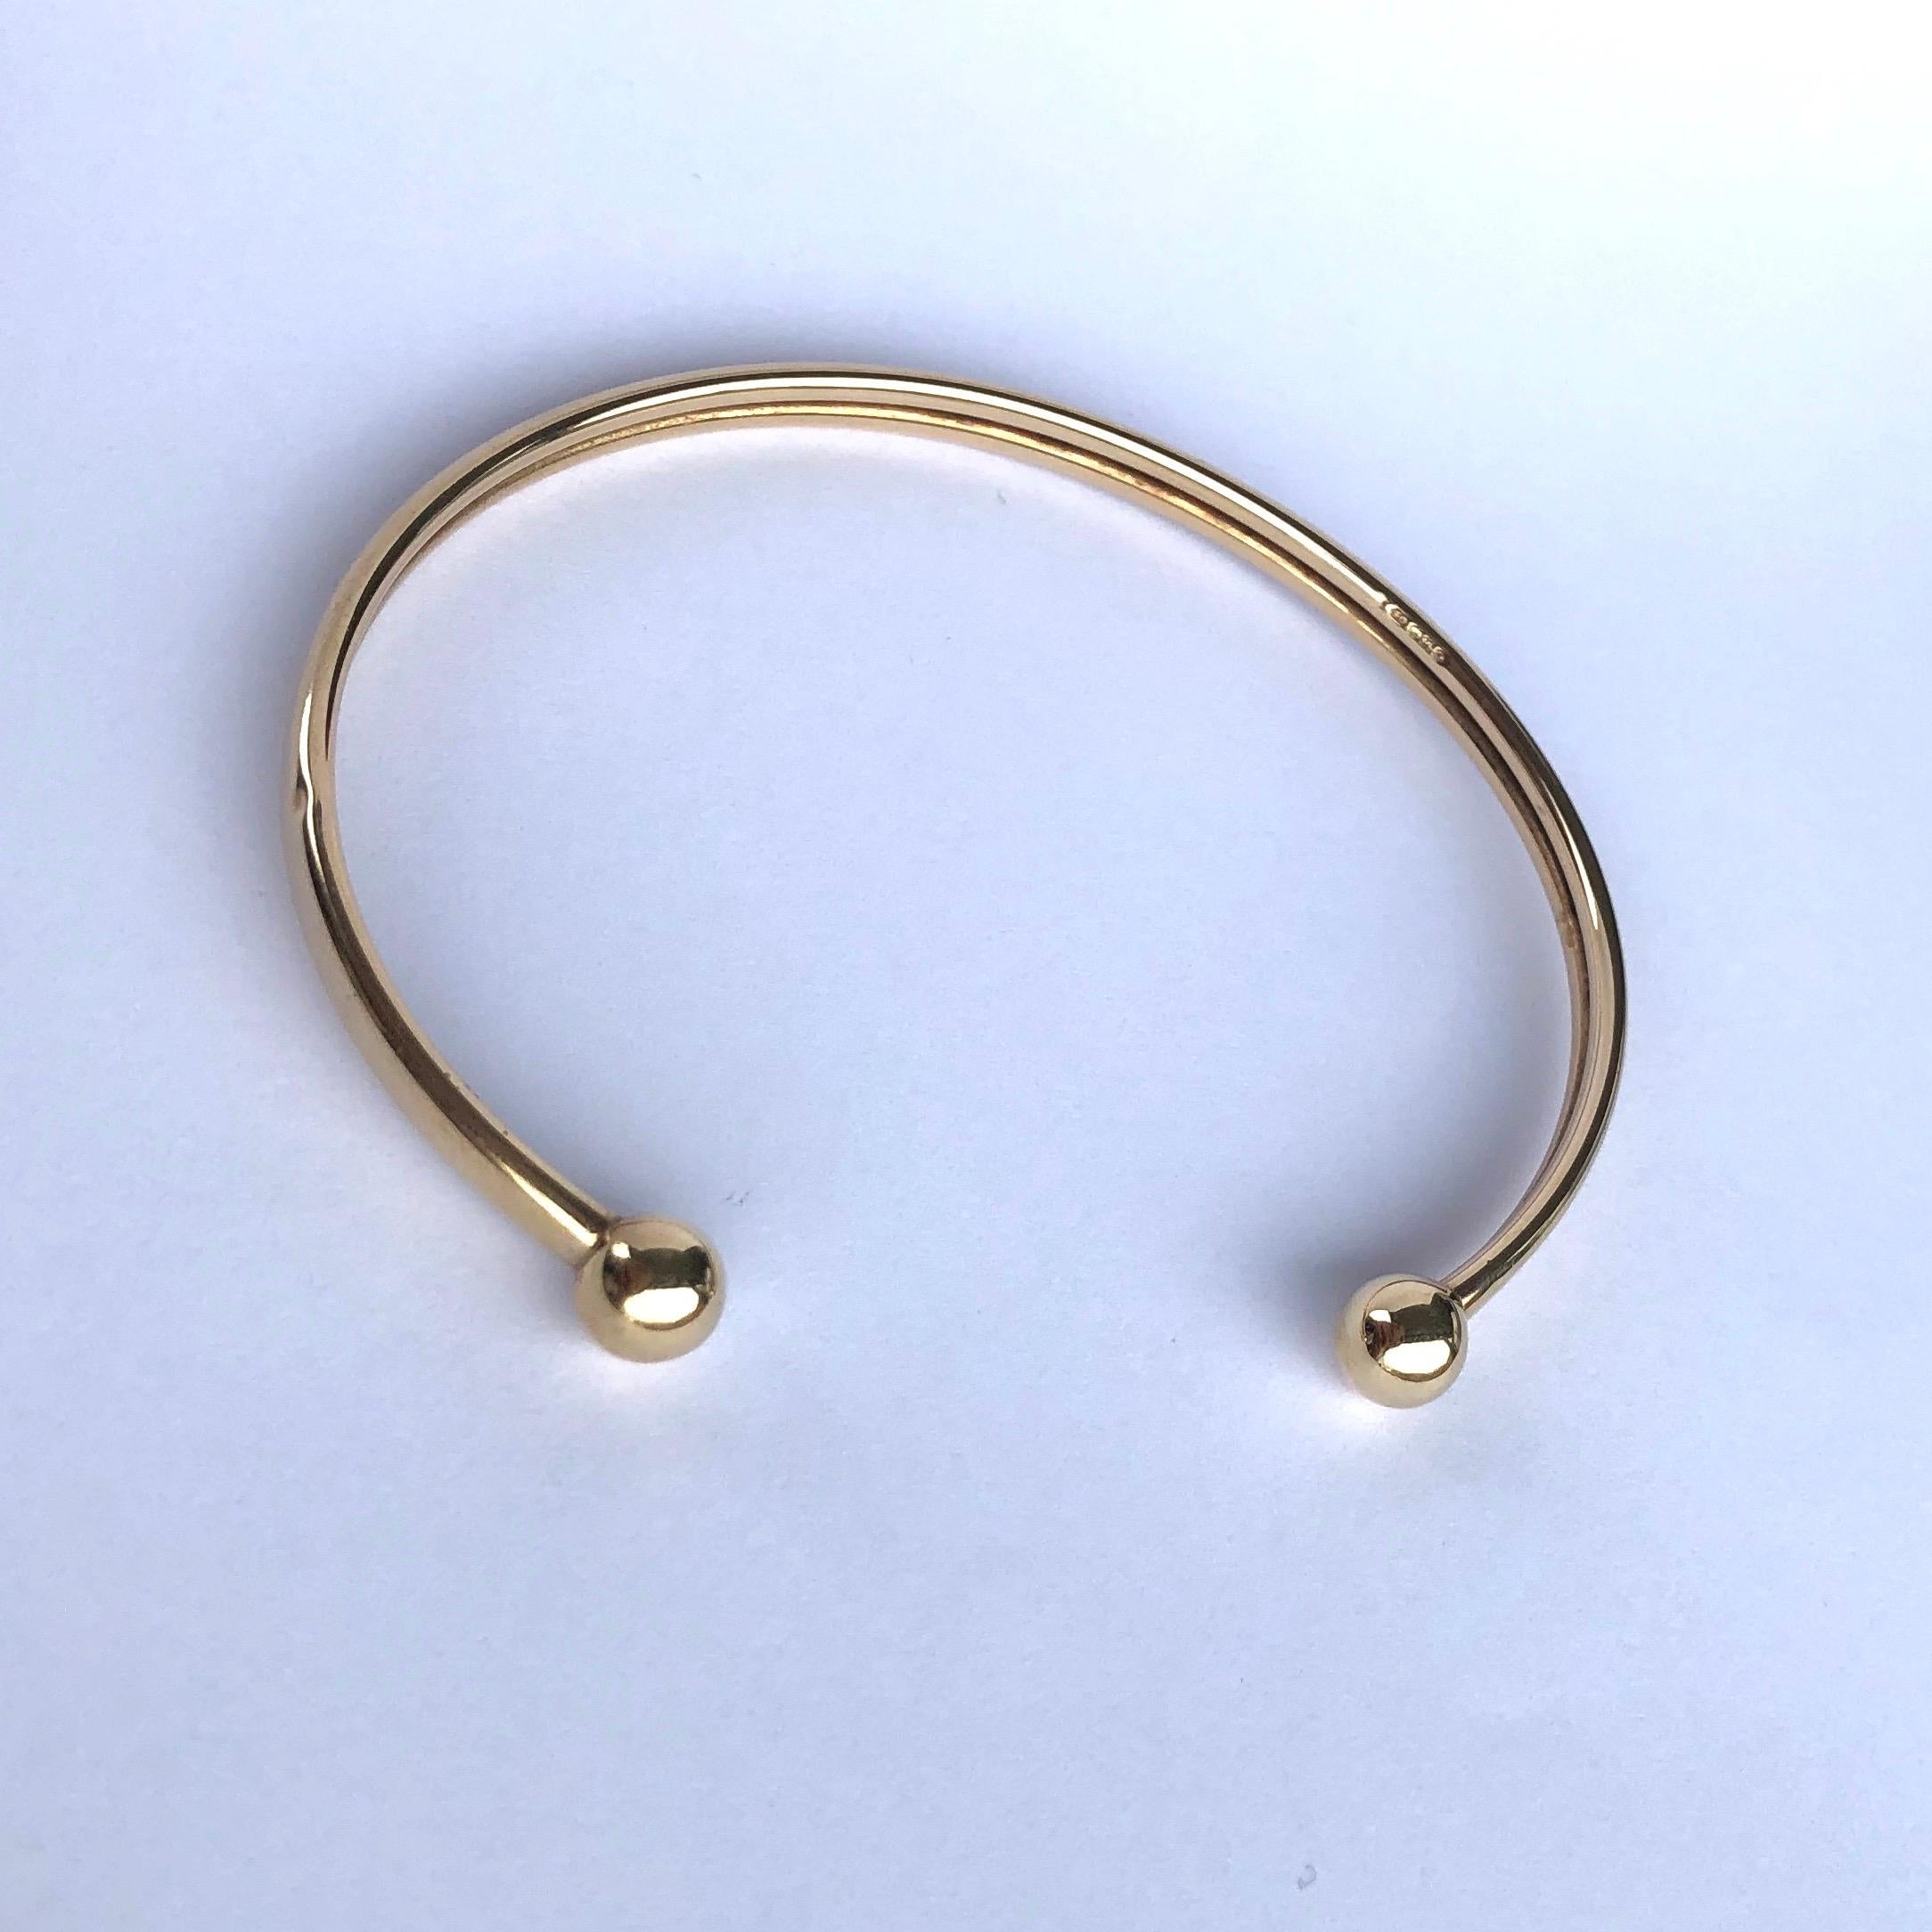 The 9 carat gold is bright and glossy and creates a classic style bangle. Made in Birmingham, England.

Inner Diameter: 6cm
 
Weight: 3.52g

